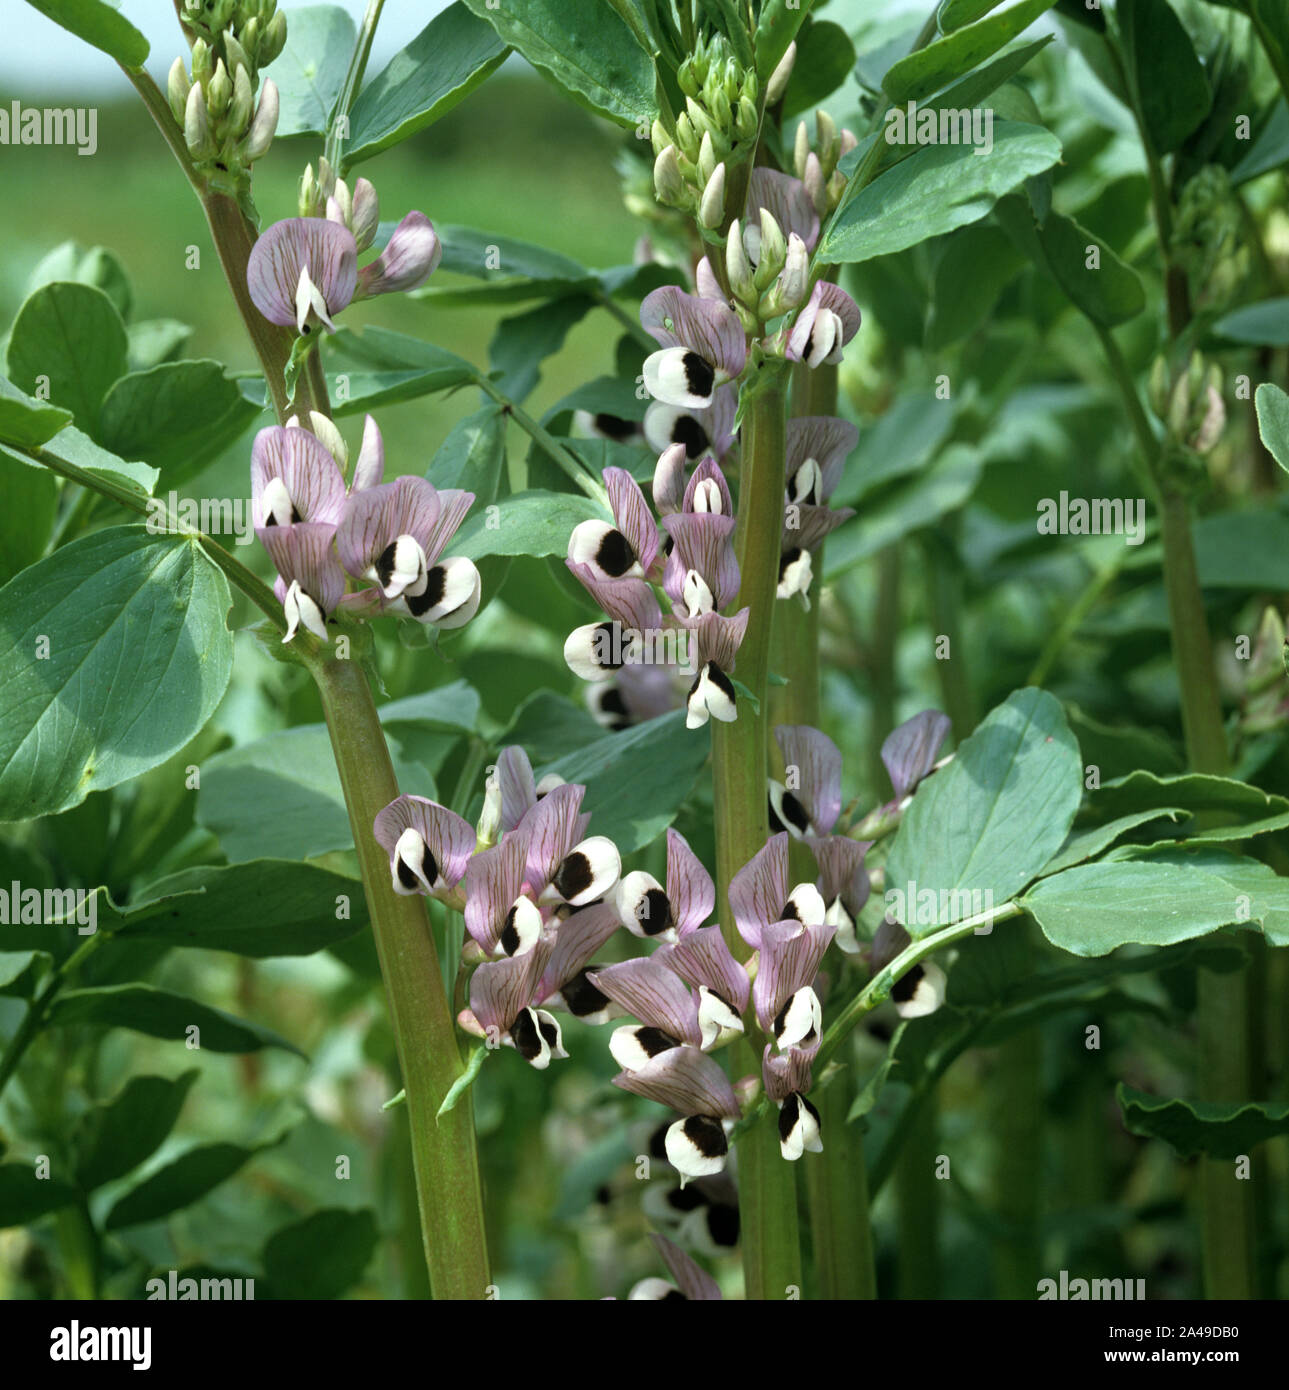 A crop of field or fava beans (Vicia faba) flowering.  Used for animal food and as a break crop to replace soil nitrogen levels Stock Photo